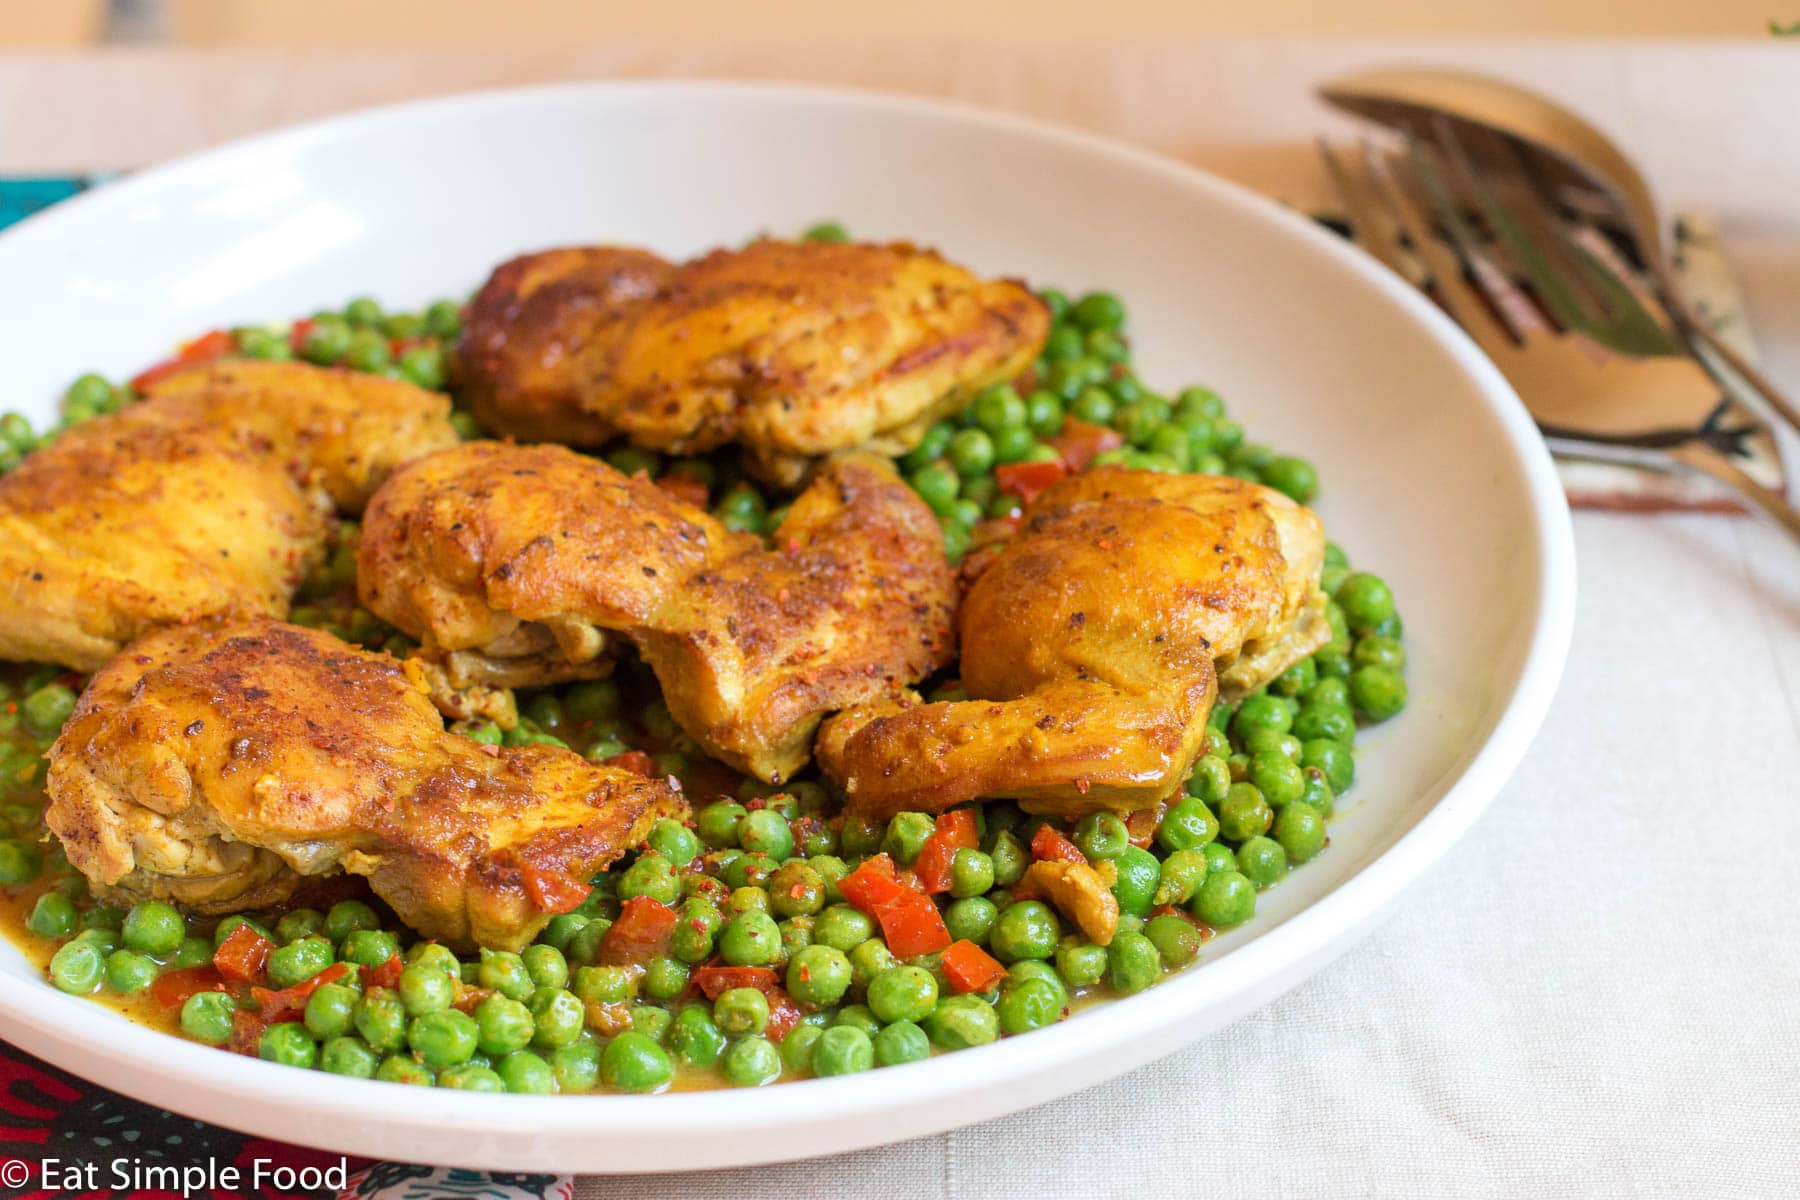 Top view. White deep platter with 5 browned cooked chicken thighs on a bed of bright green peas and cooked peppers. Serving silverware on side.